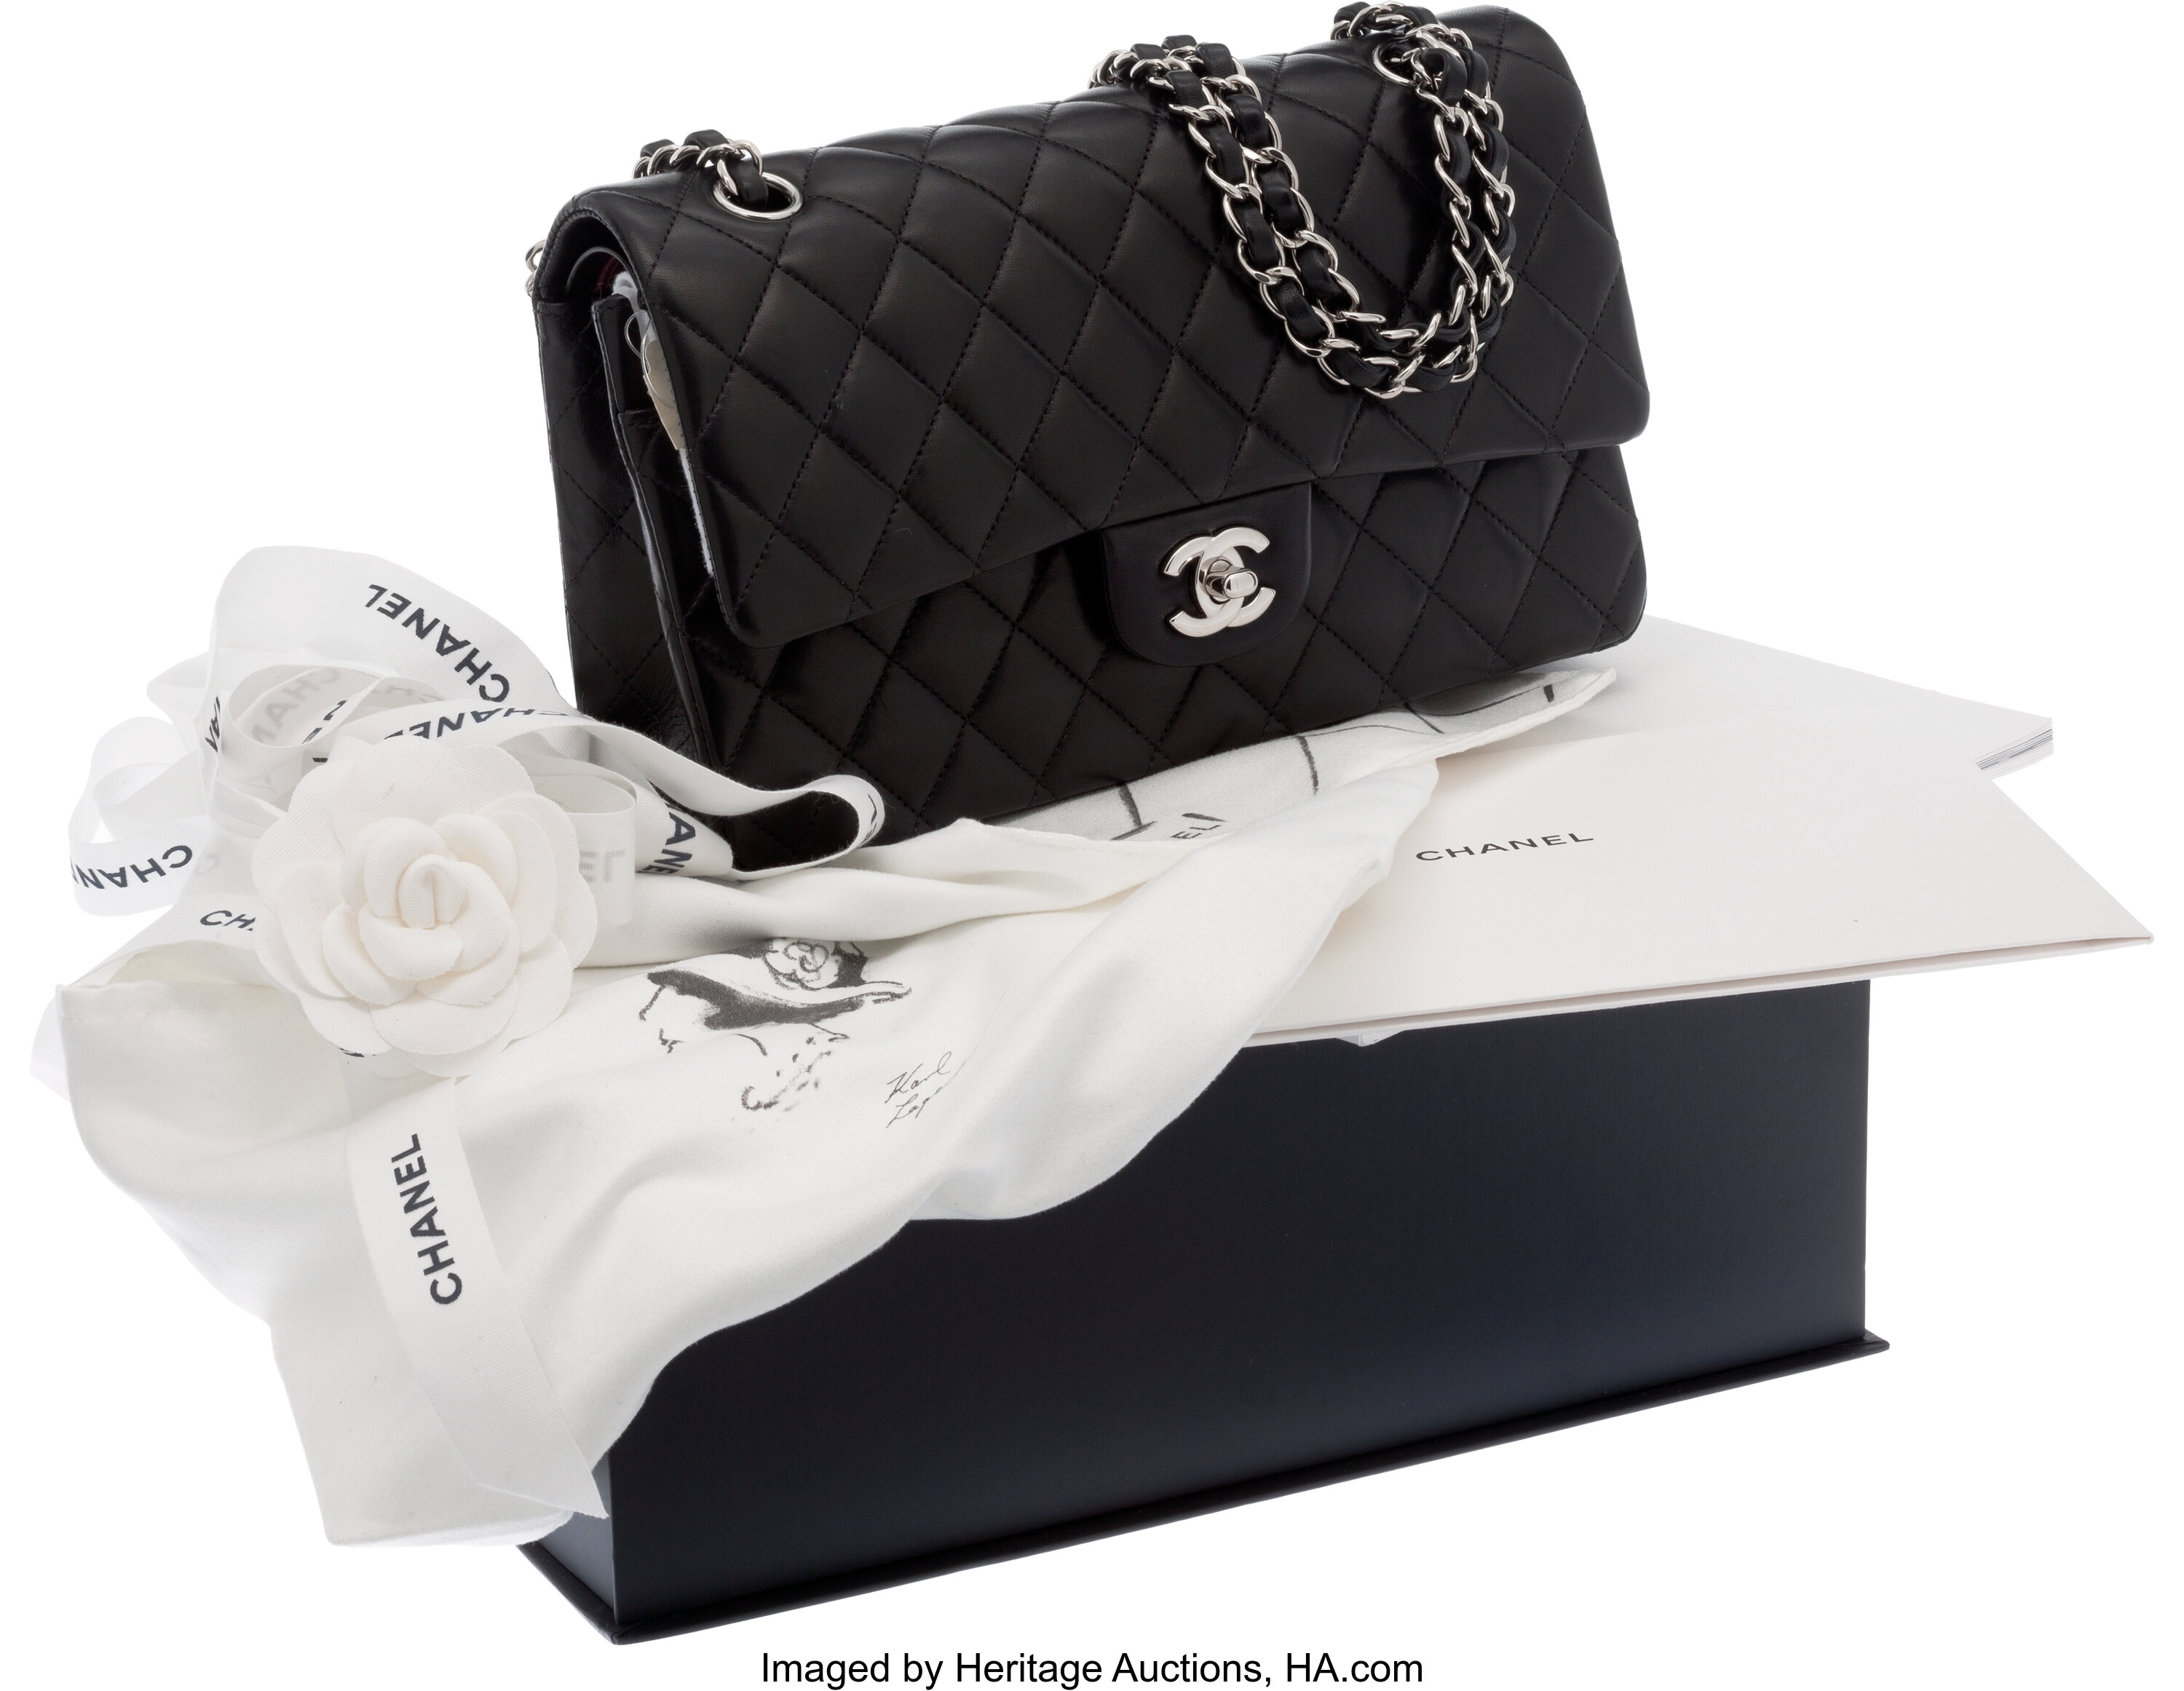 Chanel 2012 Bergdorf Goodman Special Edition Black Lambskin Leather, Lot  #56228